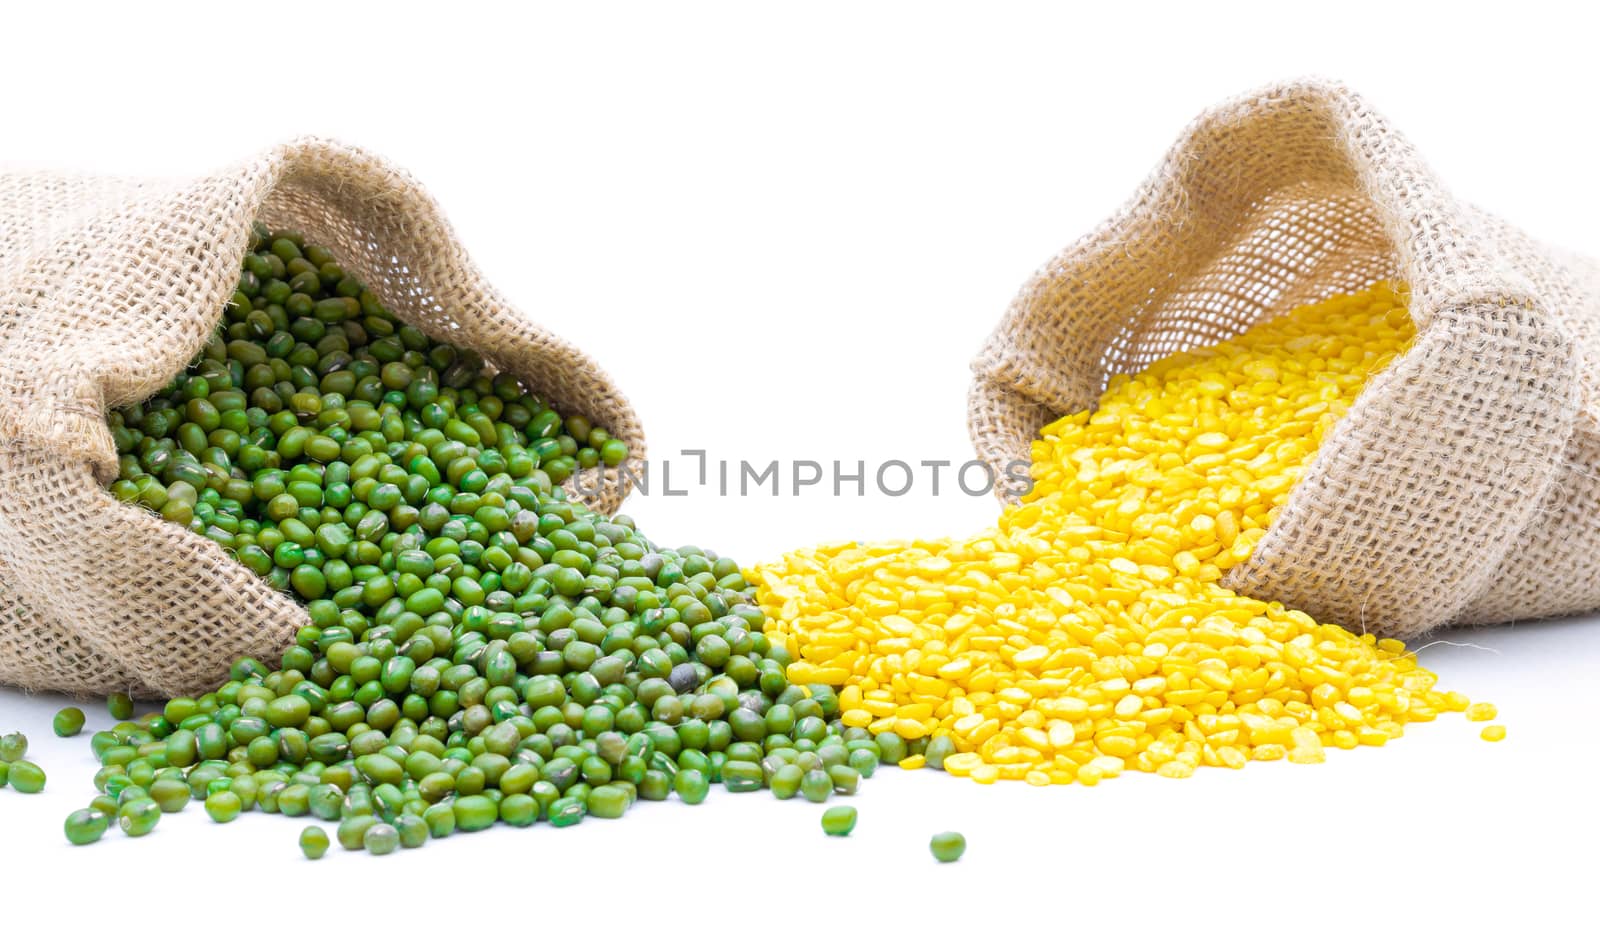 Grains Mung bean in a sack on a white background